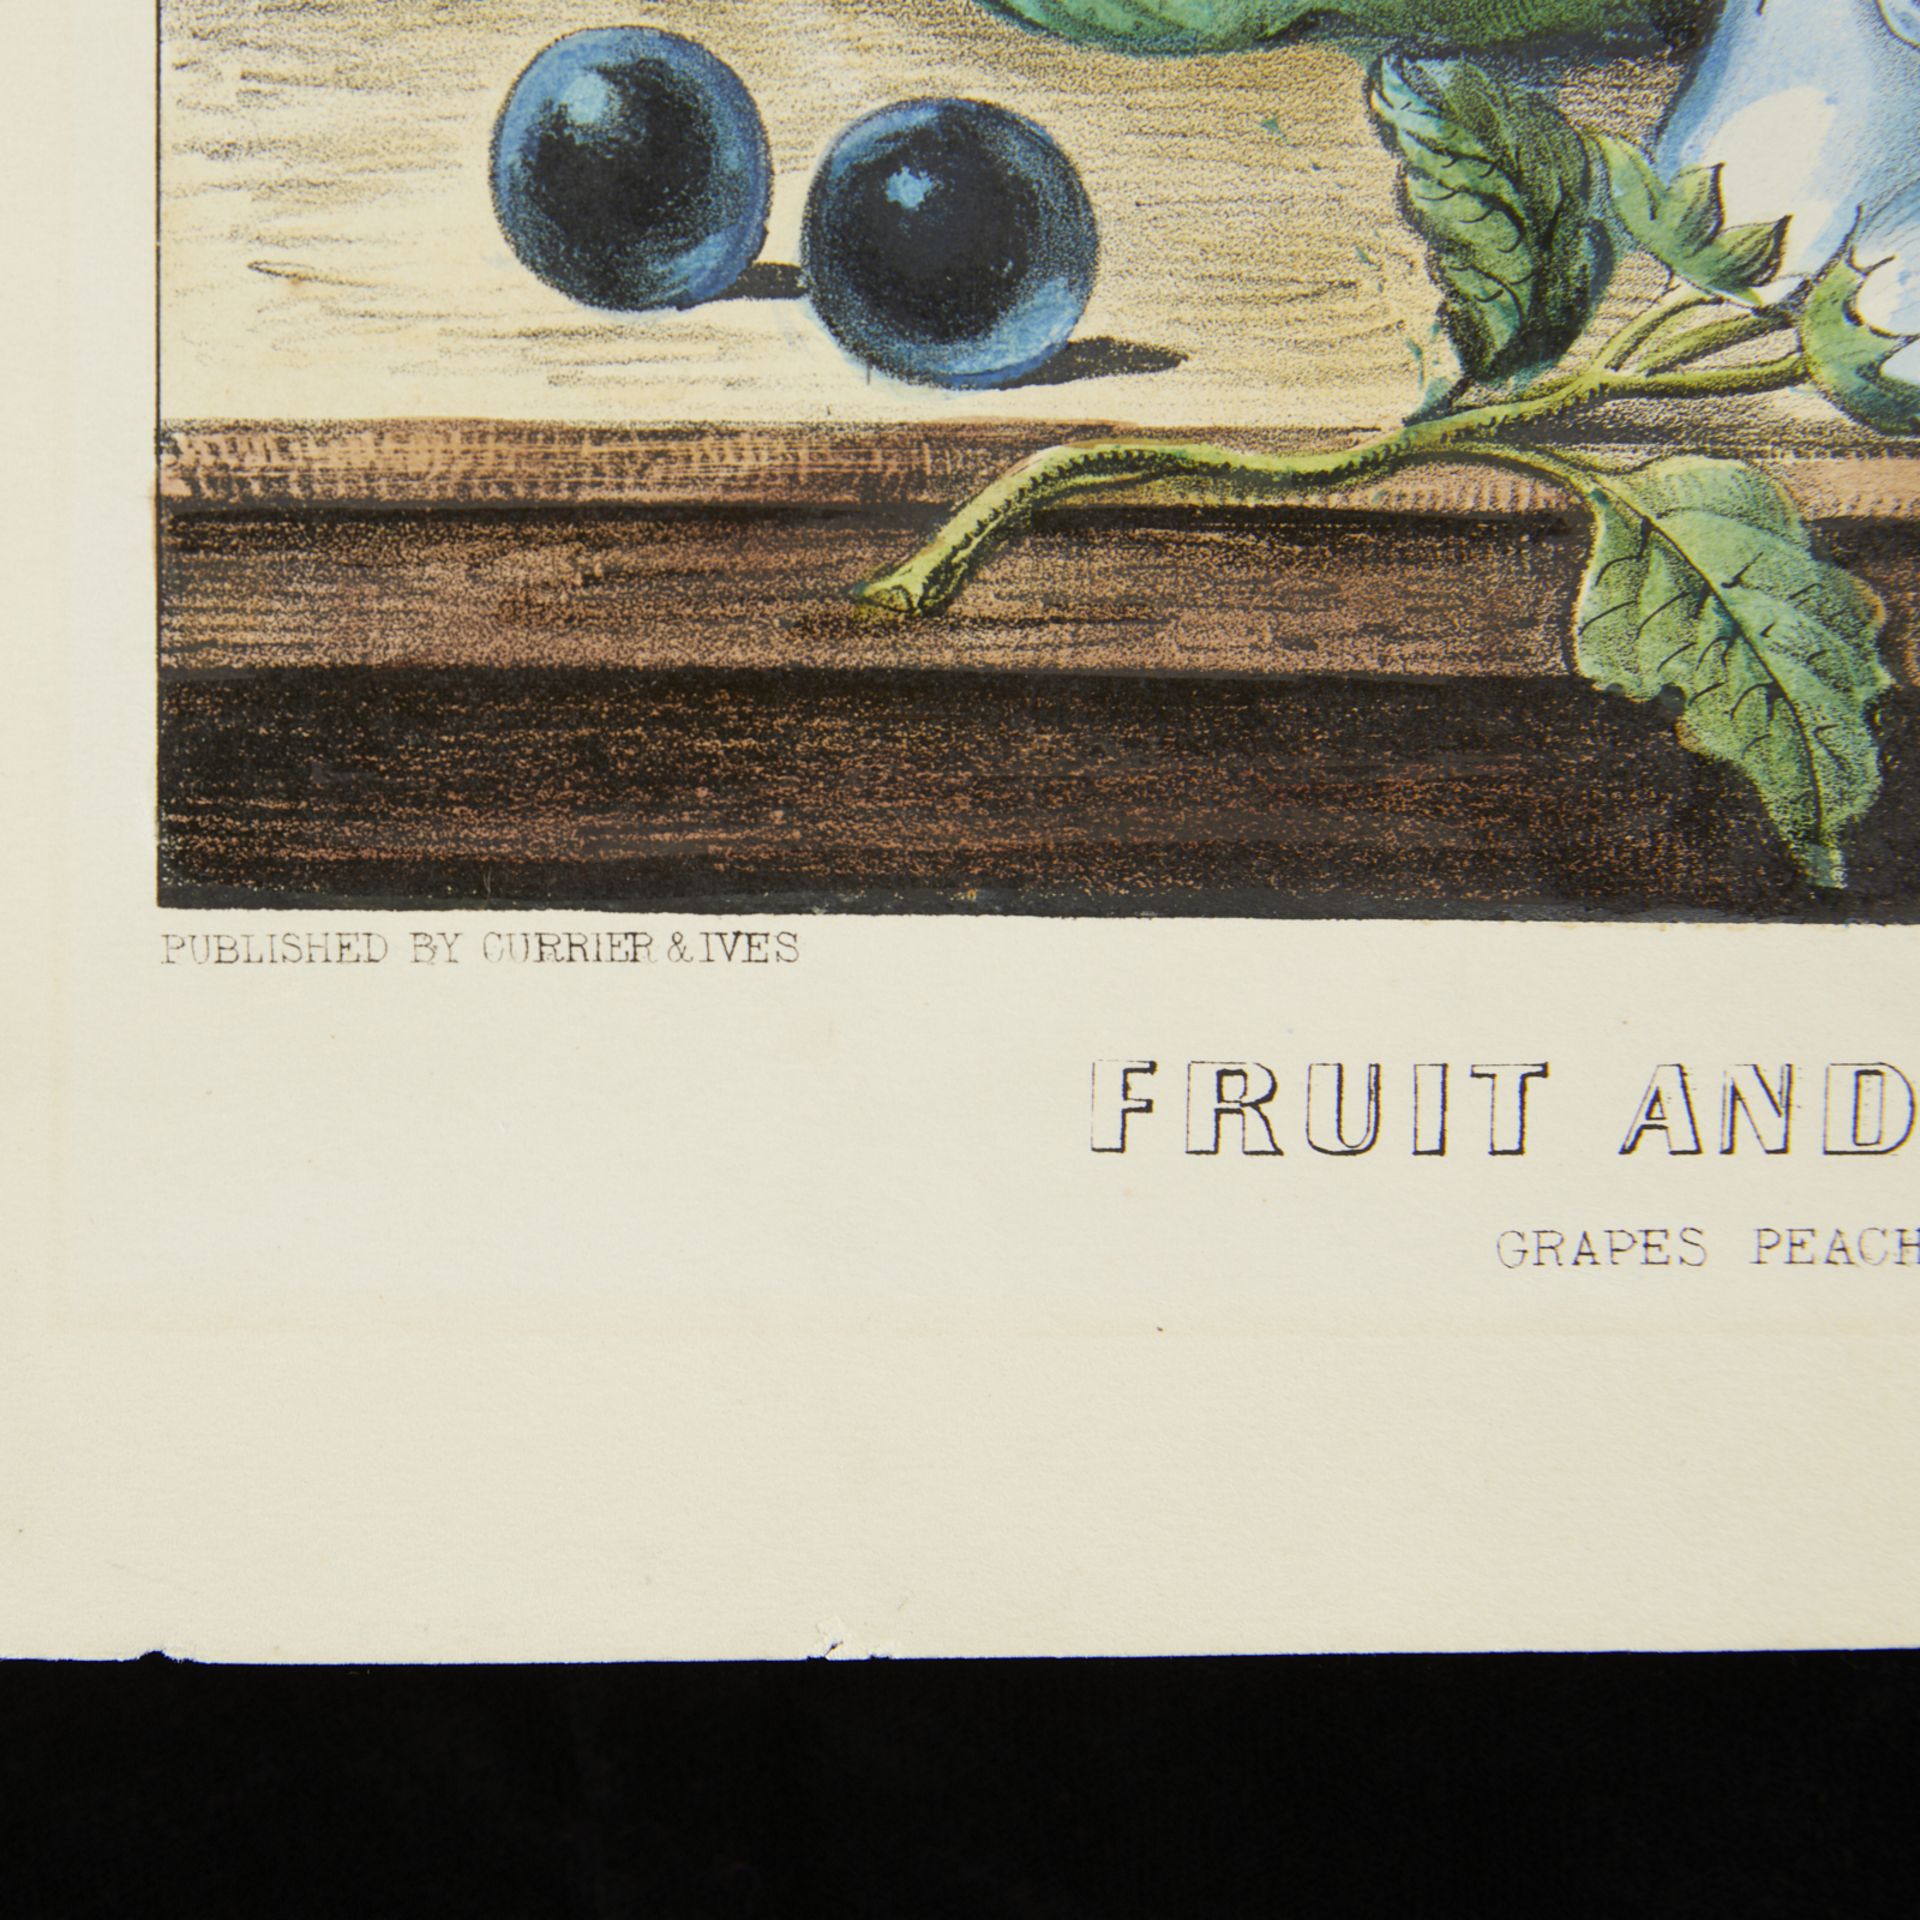 Currier & Ives "Fruit & Flowers" Print 1870 - Image 4 of 8